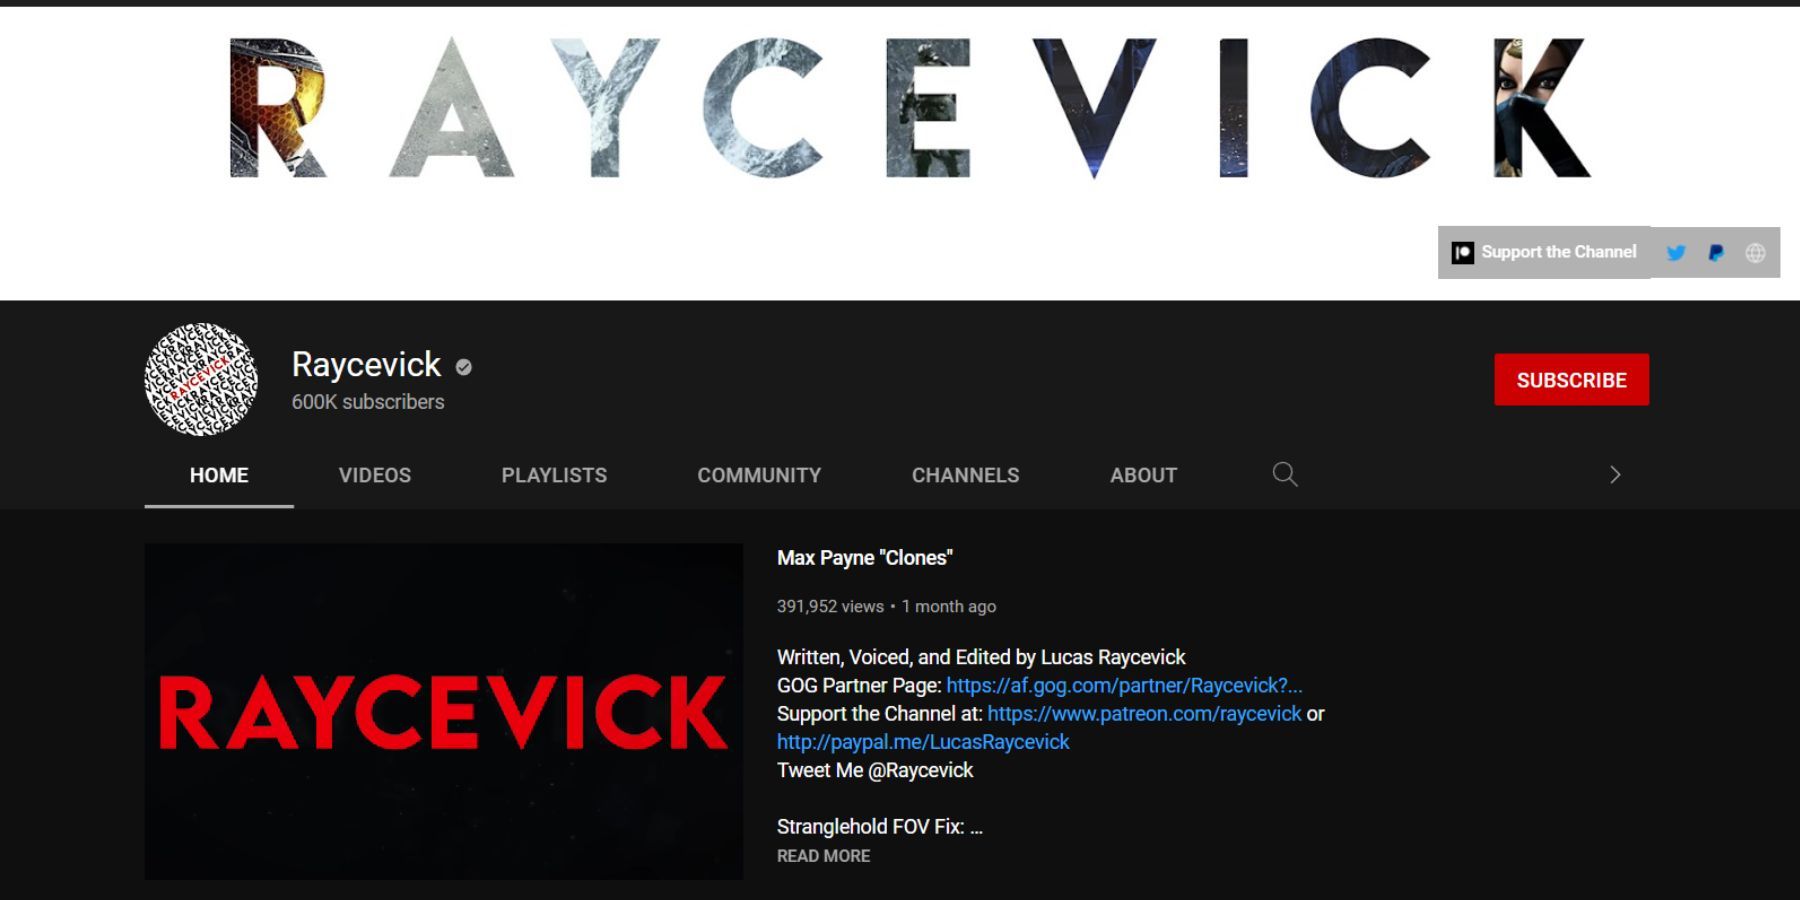 Channel page for Racyevick on YouTube